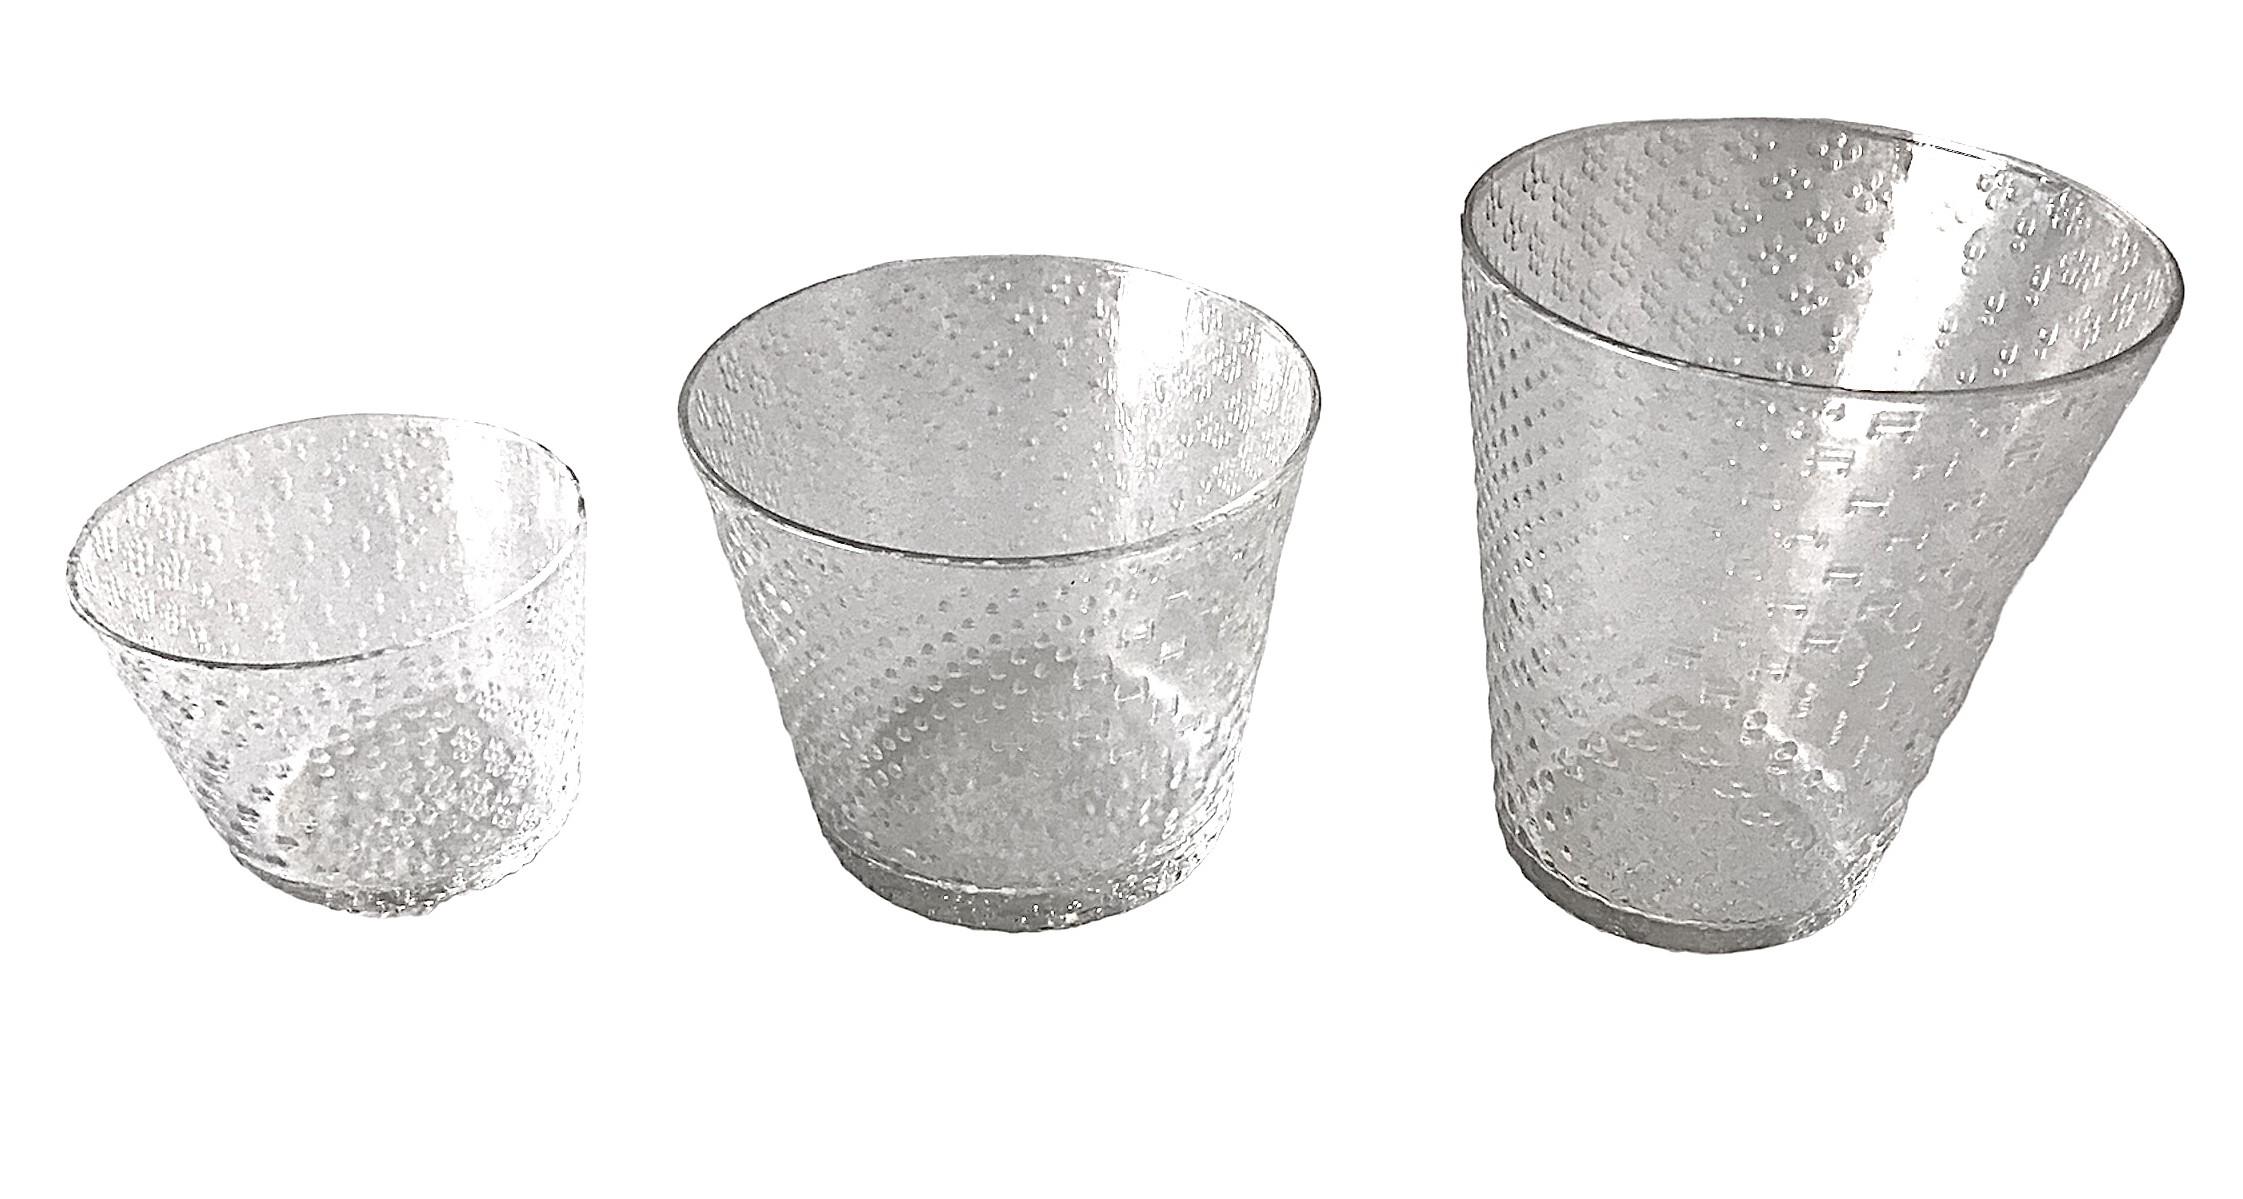 Modern Finn Design by Oiva Toikka from 1970, Tundra glassware for Arabia, Finland.    The design is of multiple unique small patterns influenced by  the Artic tundra.  Textured clear glass collection inspired by the harsh Artic landscape which would